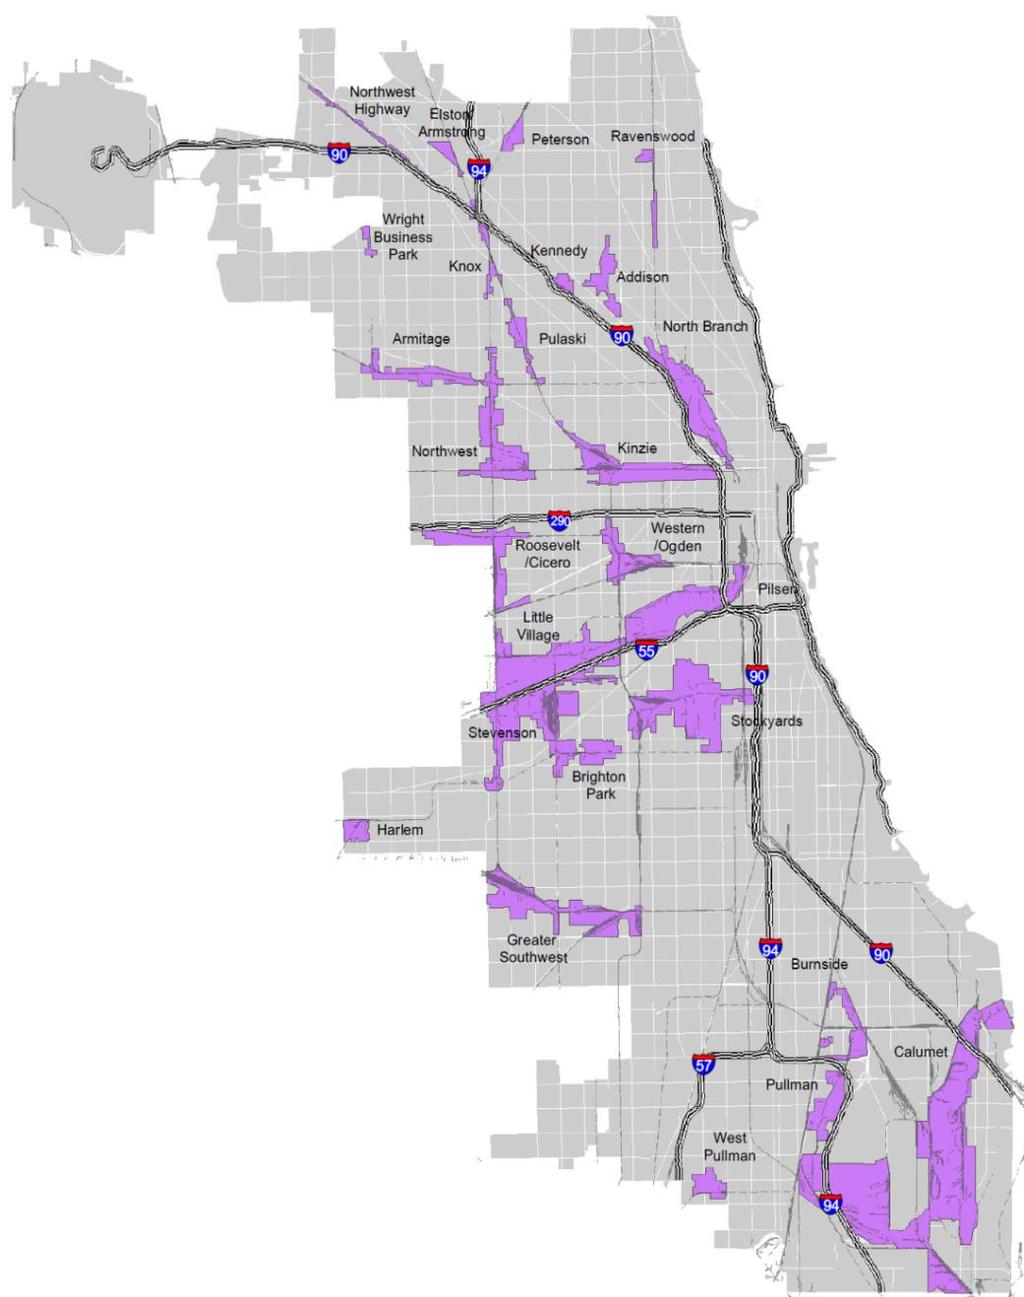 Industrial Corridor Modernization Initiative In 2016, DPD began evaluating Chicago s 26 Industrial Corridors in order to: Better understand the industrial marketplace Evaluate the need for updates to